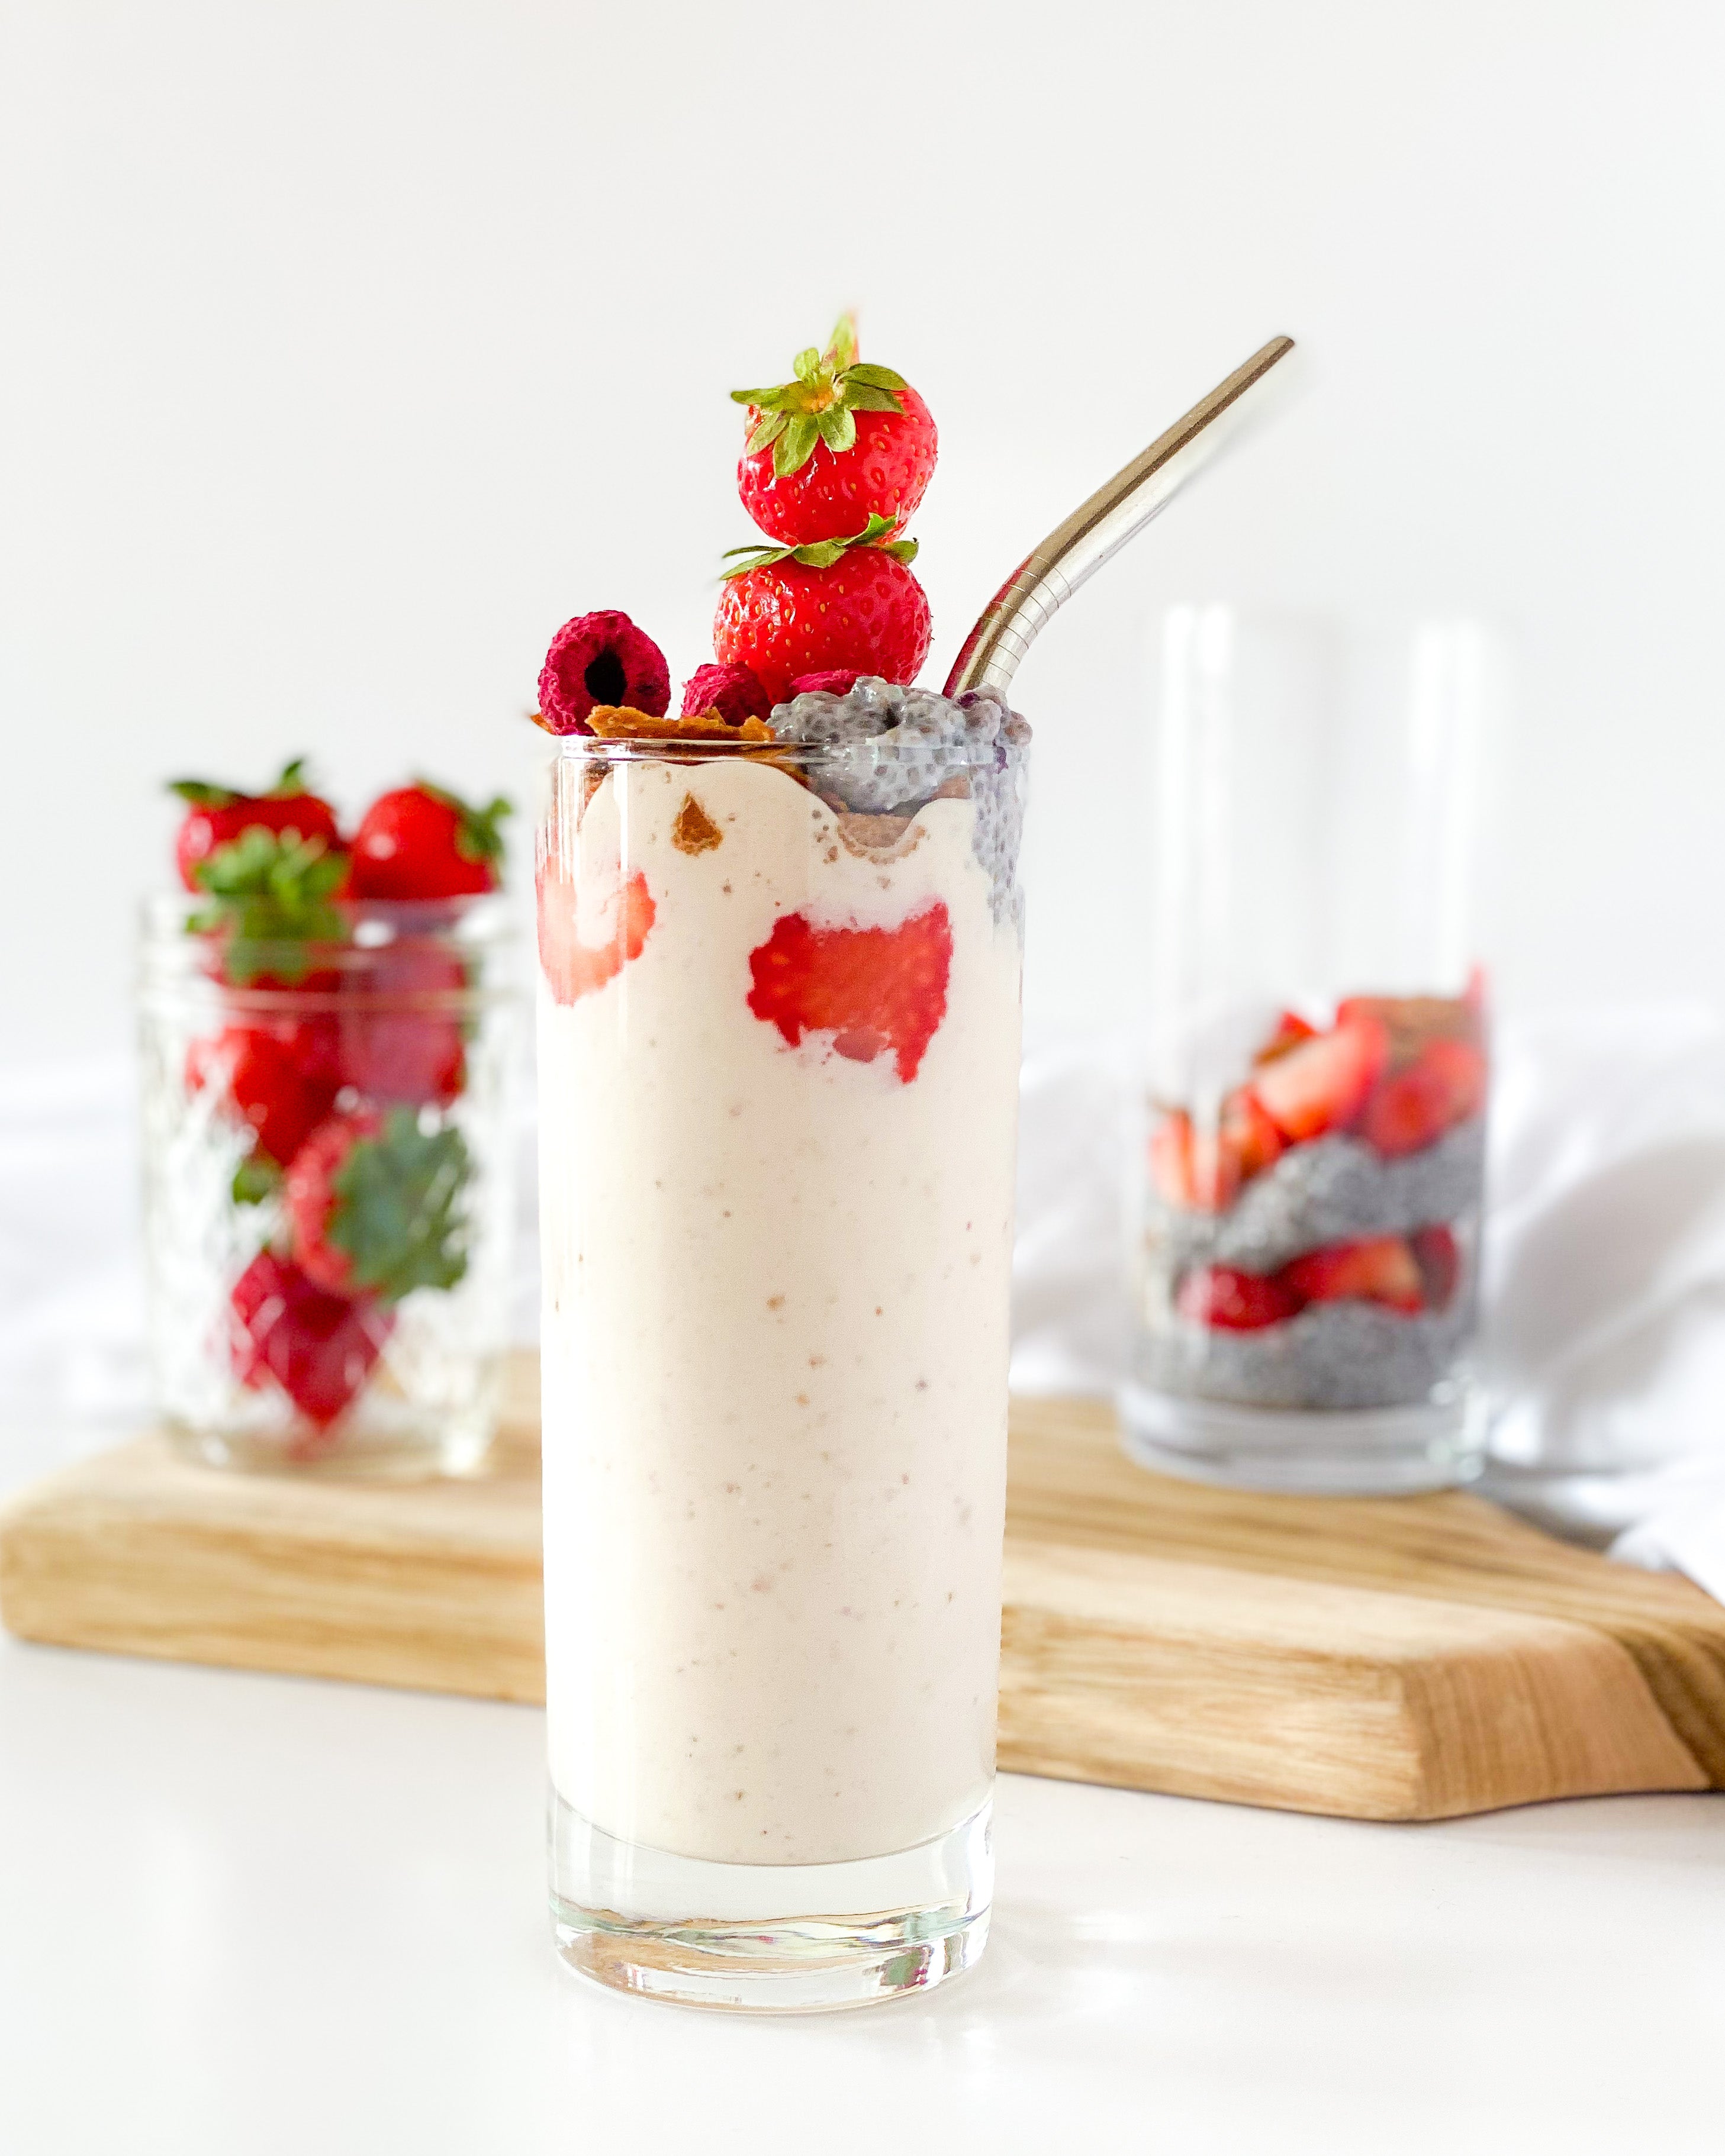 GRAIN FREE CRISPY CERIAL SMOOTHIE WITH CHIA PUDDING